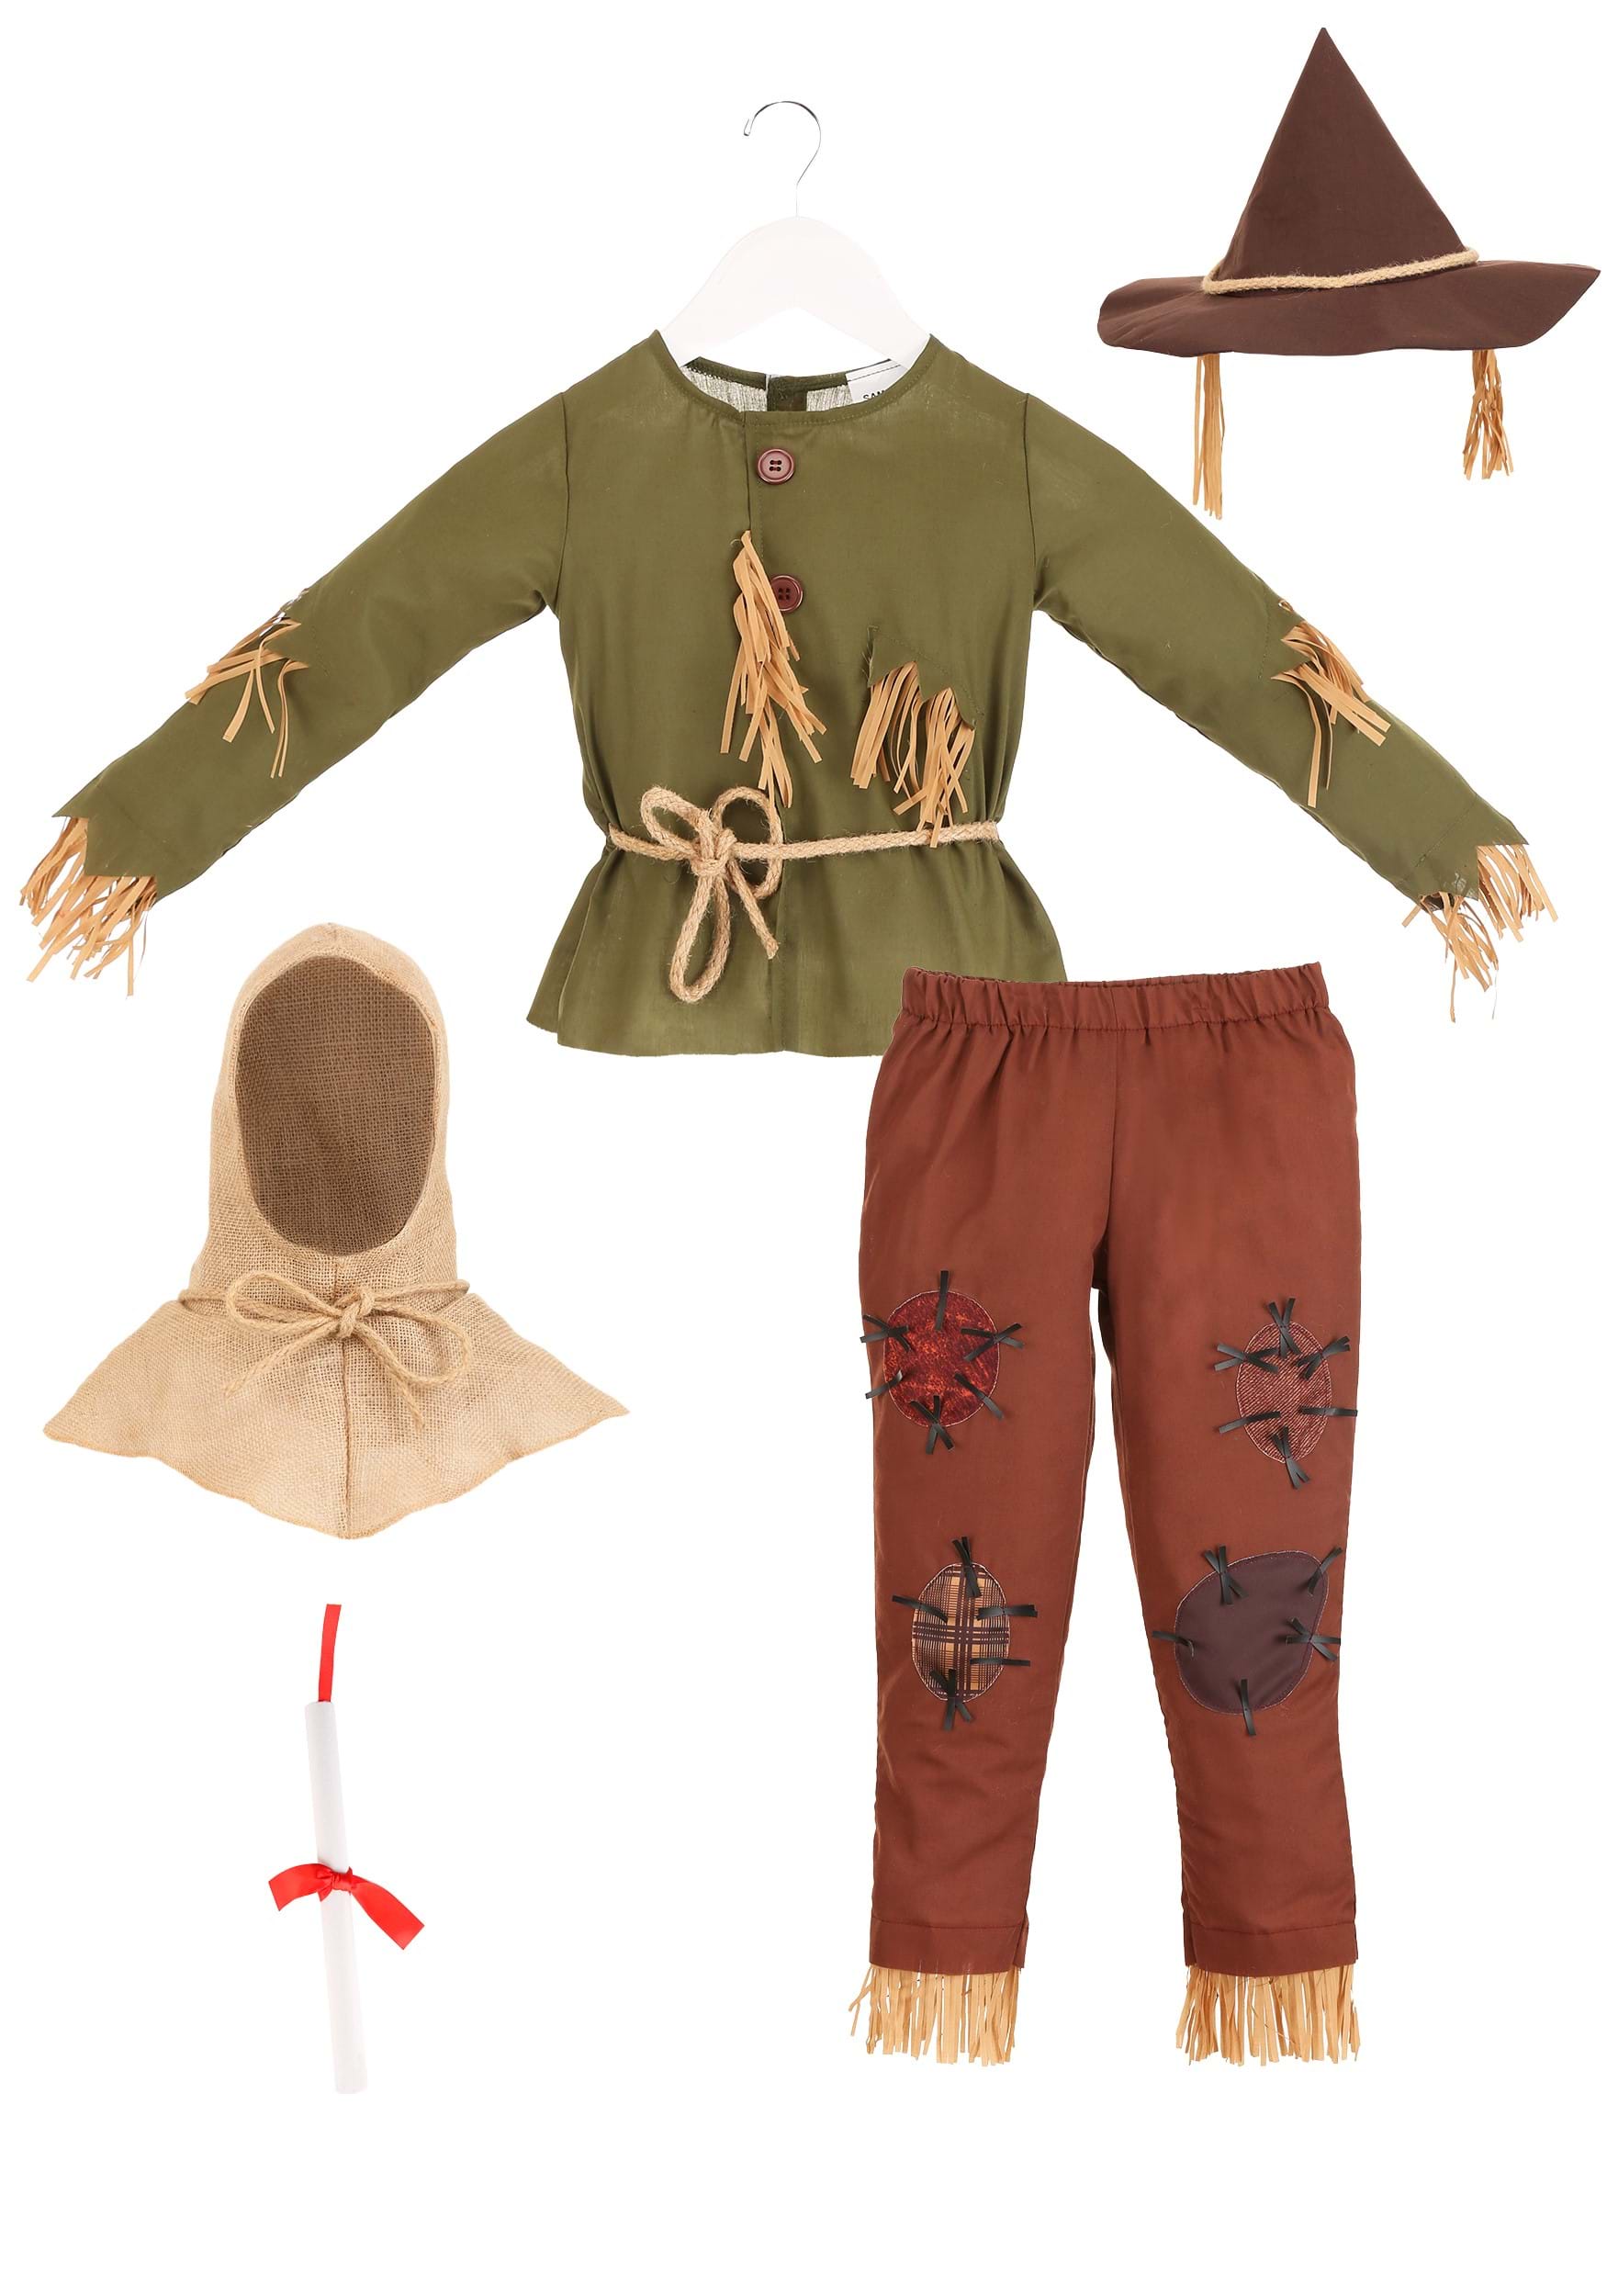 Straw Scarecrow Costume Kit with Scarecrow Hat Fake Straw for